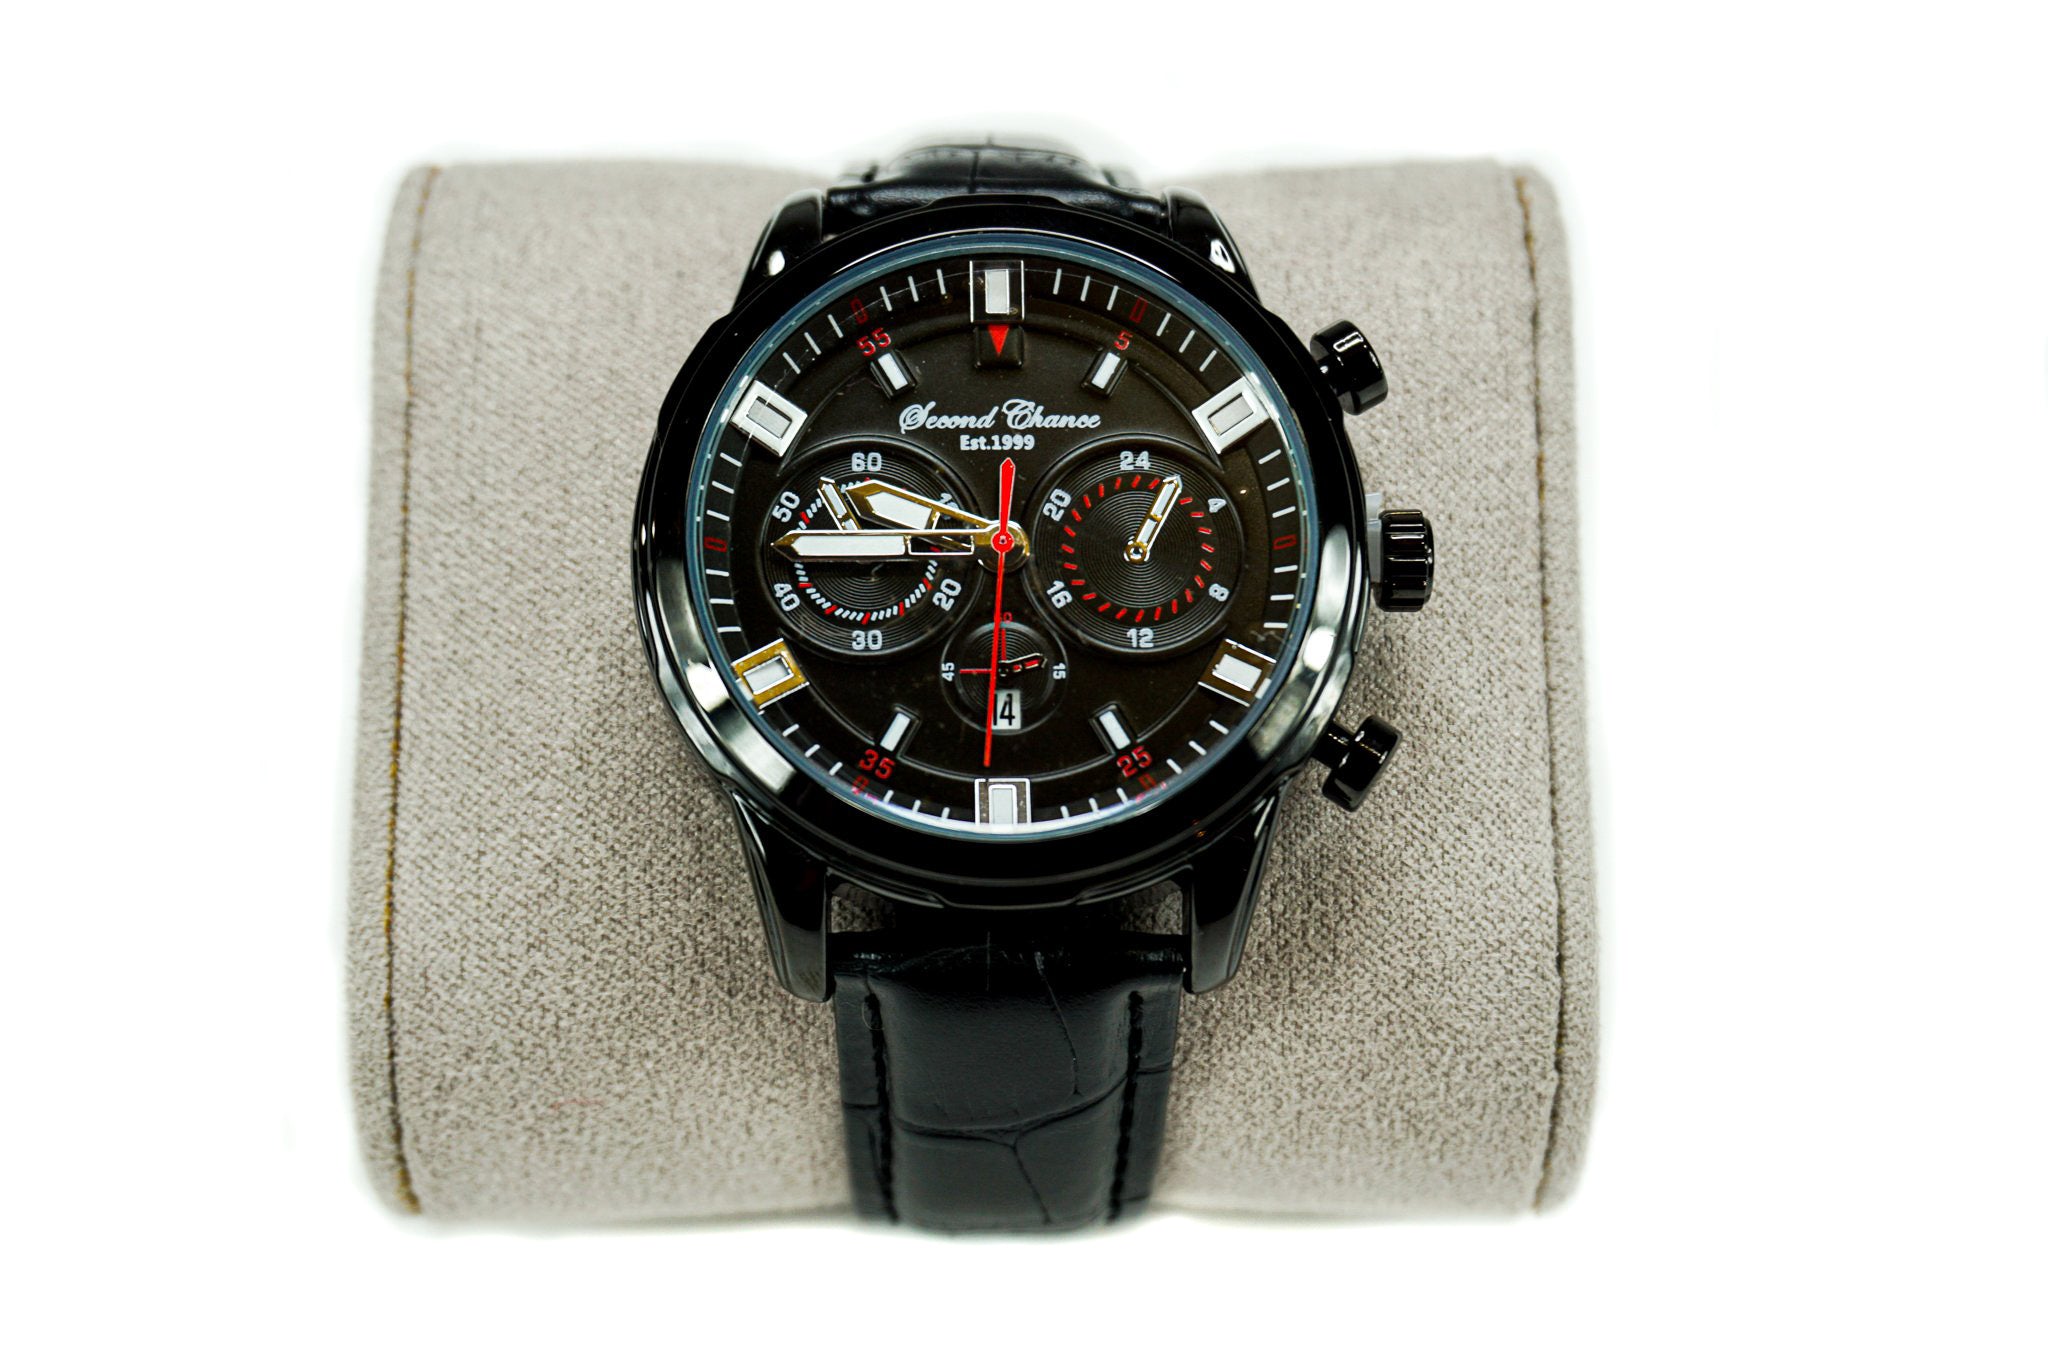 Signature Chronograph Black Leather Band Watch